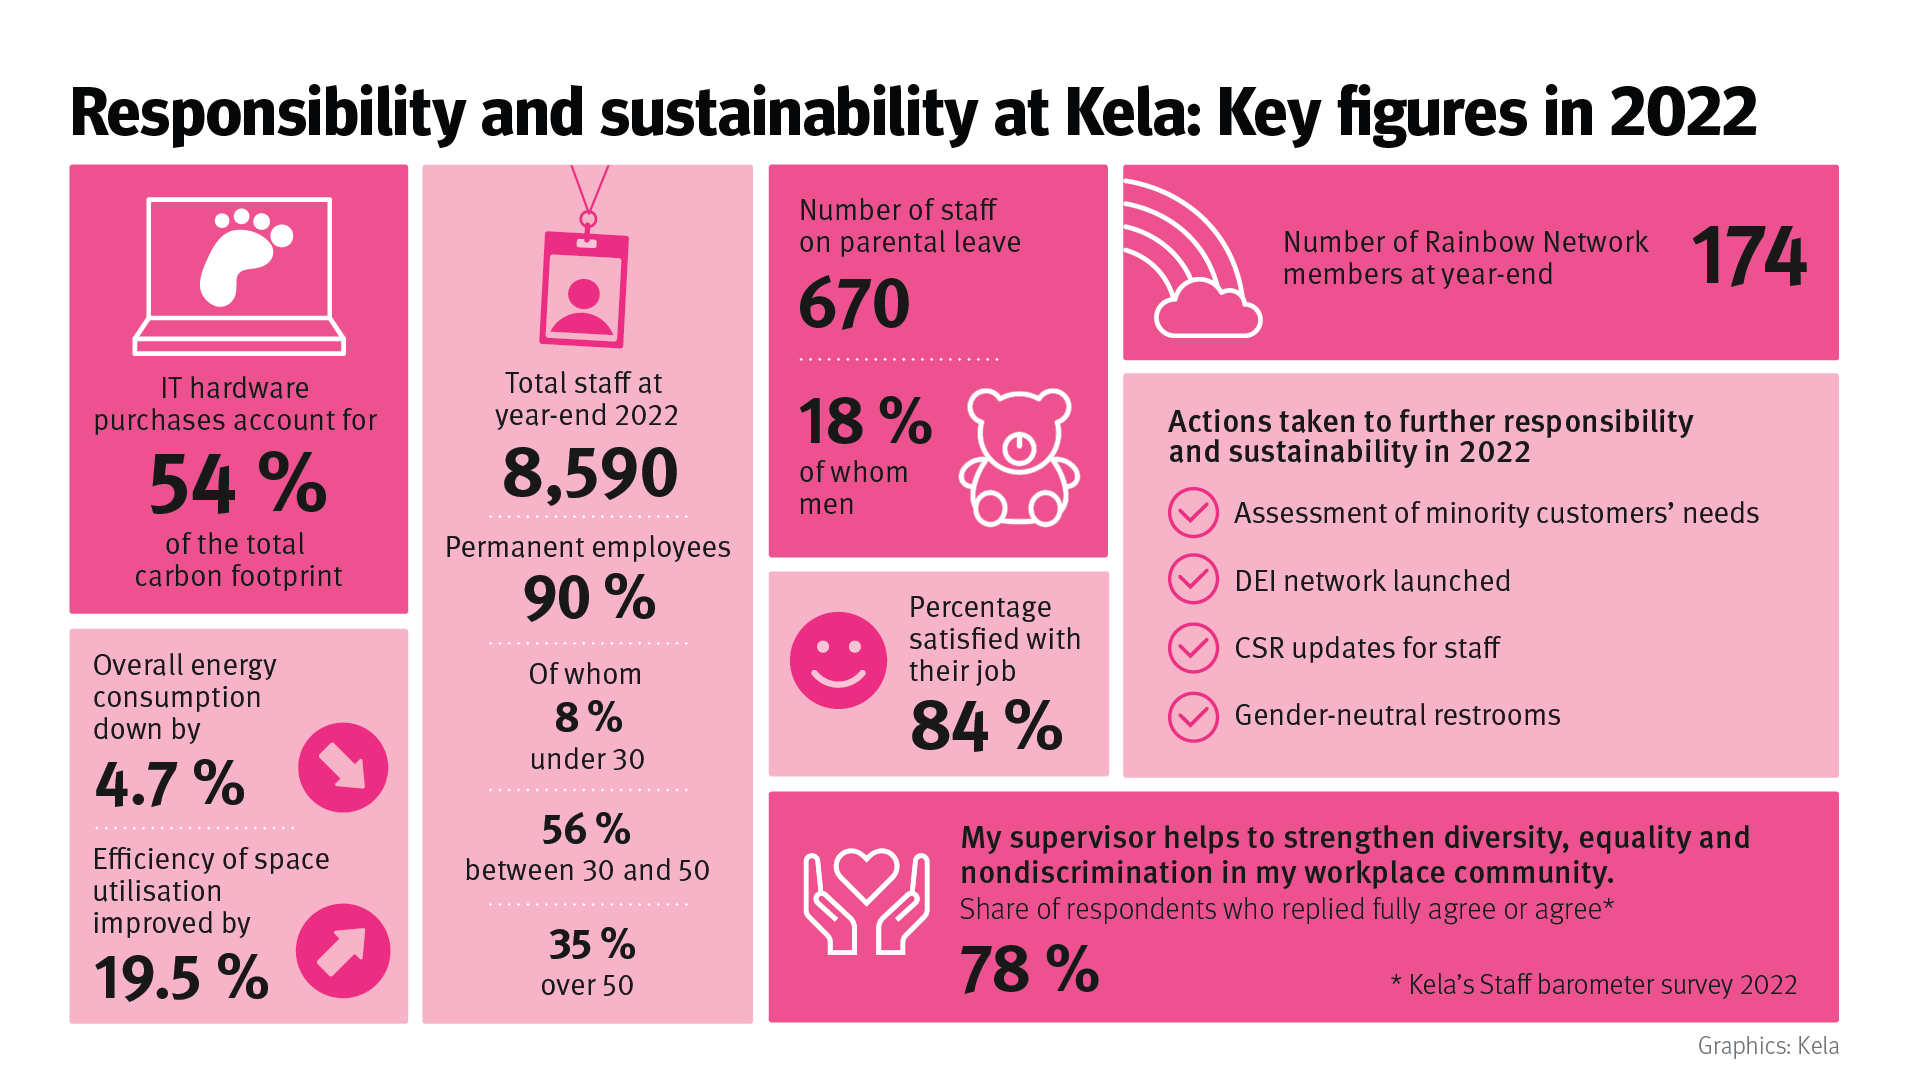 Responsibility and sustainability at Kela: Key figures in 2022. IT hardware purchases account for 54% of the total carbon footprint. Overall energy consumption down by 4.7%. Efficiency of space utilisation improved by 19.5%. Total staff at year-end 2022 8,590. Permanent employees 90%. Of whom 8% under 30. 56% between 30 and 50. 35% over 50. Number of staff on parental leave 670, 18% of whom men. Number of Rainbow Network members at year-end 174. Actions taken to further responsibility and sustainability in 2022, Assessment of minority customers’ needs, DEI network launched, CSR updates for staff, Gender-neutral restrooms. Percentage satisfied with their job: 84%. "My supervisor helps to strengthen diversity, equality and nondiscrimination in my workplace community Share of respondents who replied fully agree or agree" 78%. 